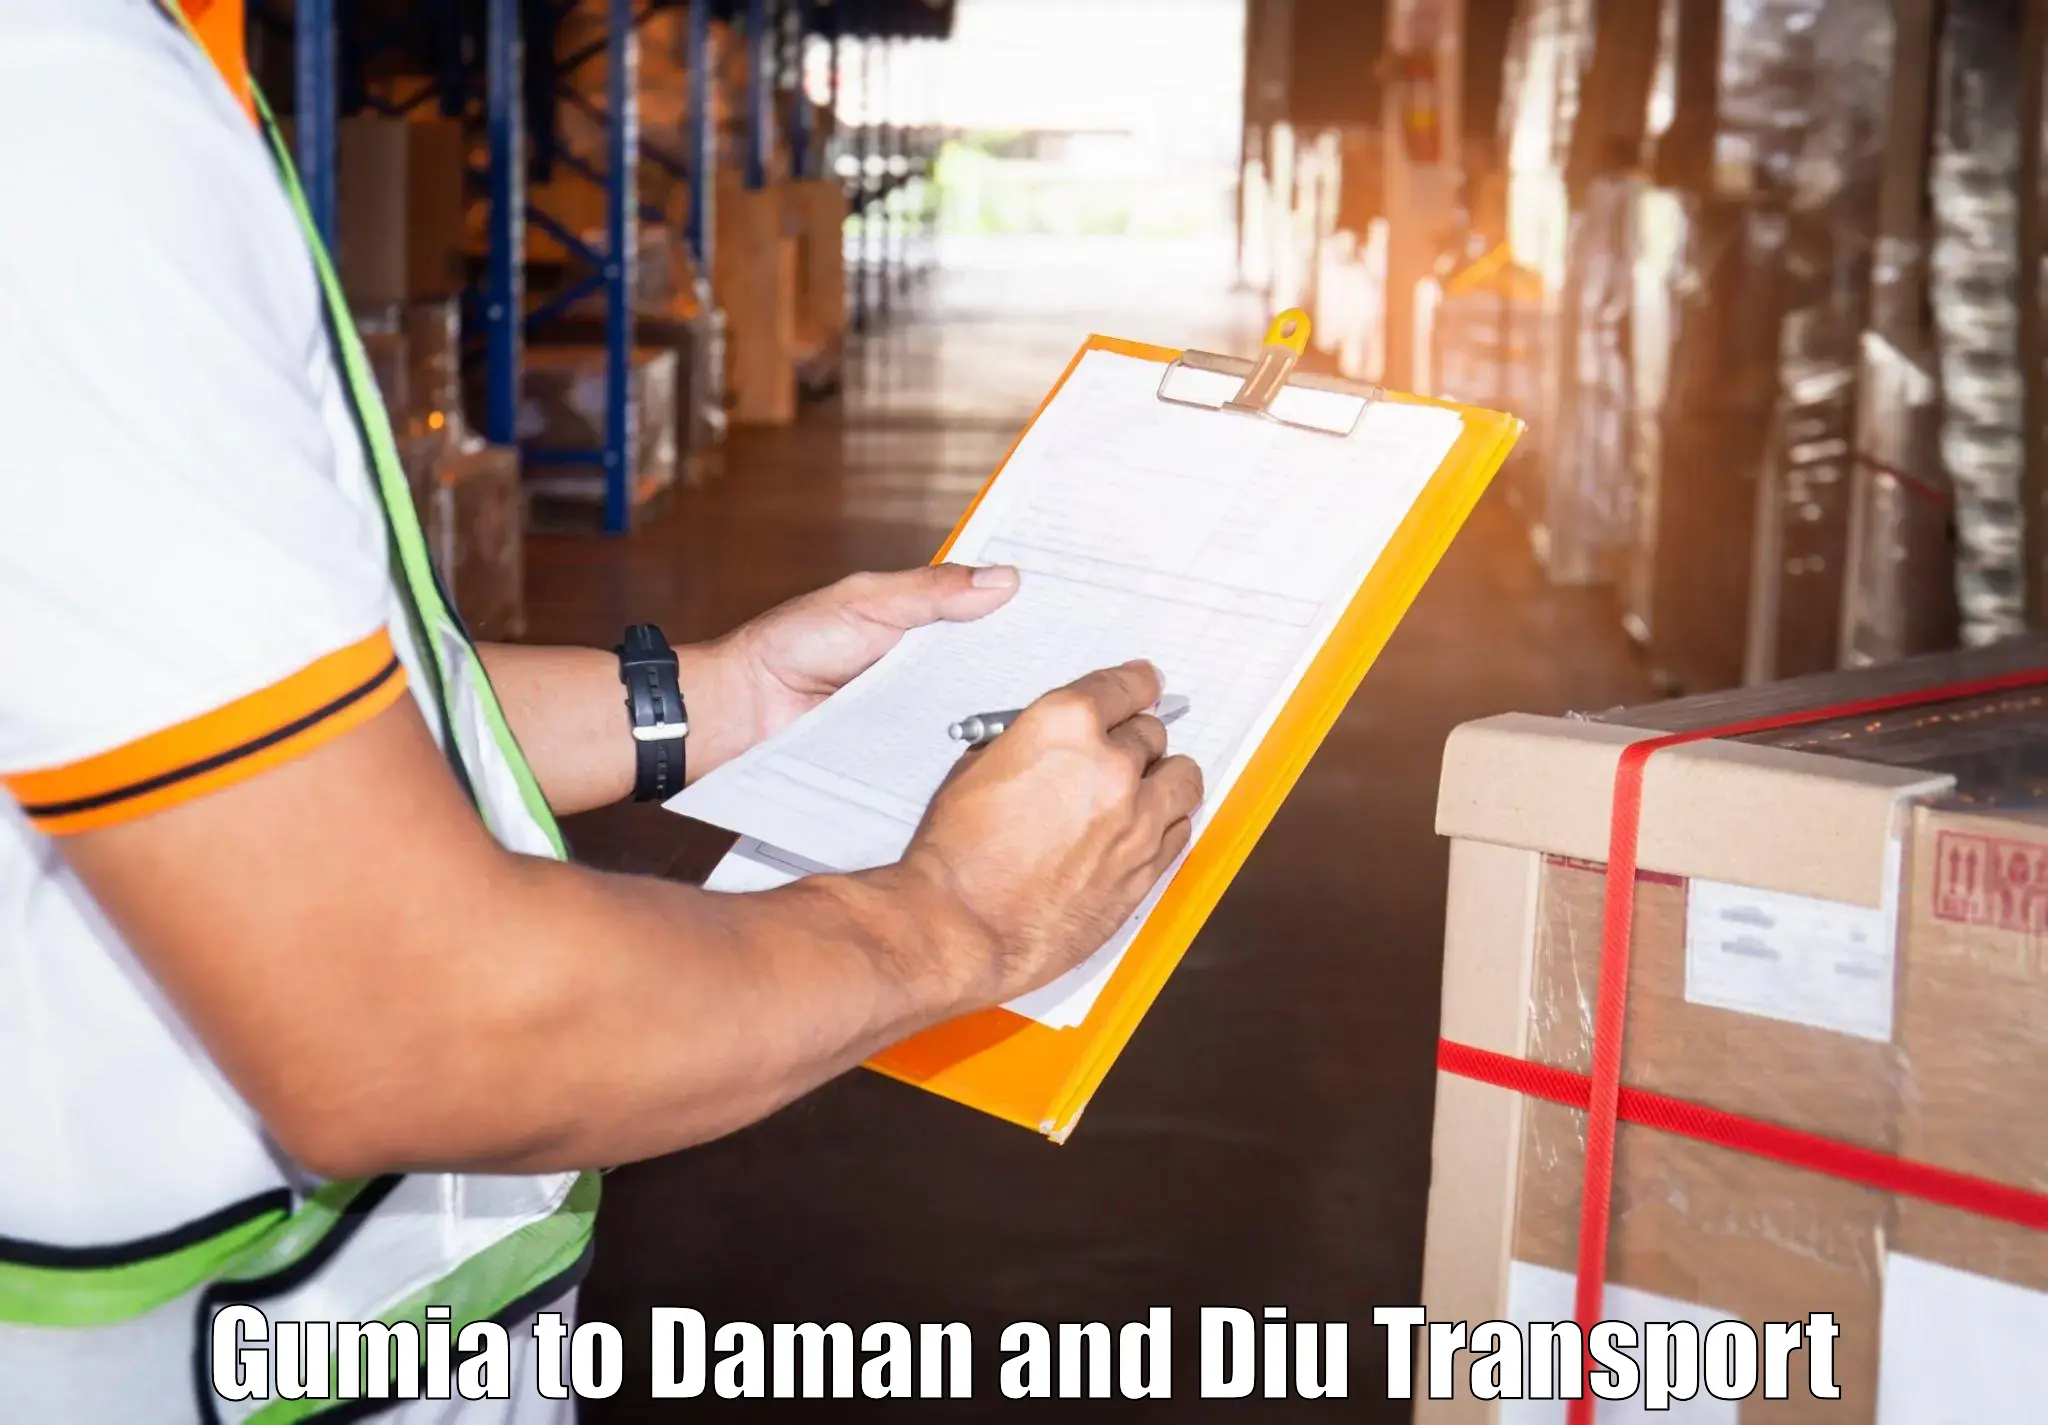 Transport shared services in Gumia to Diu